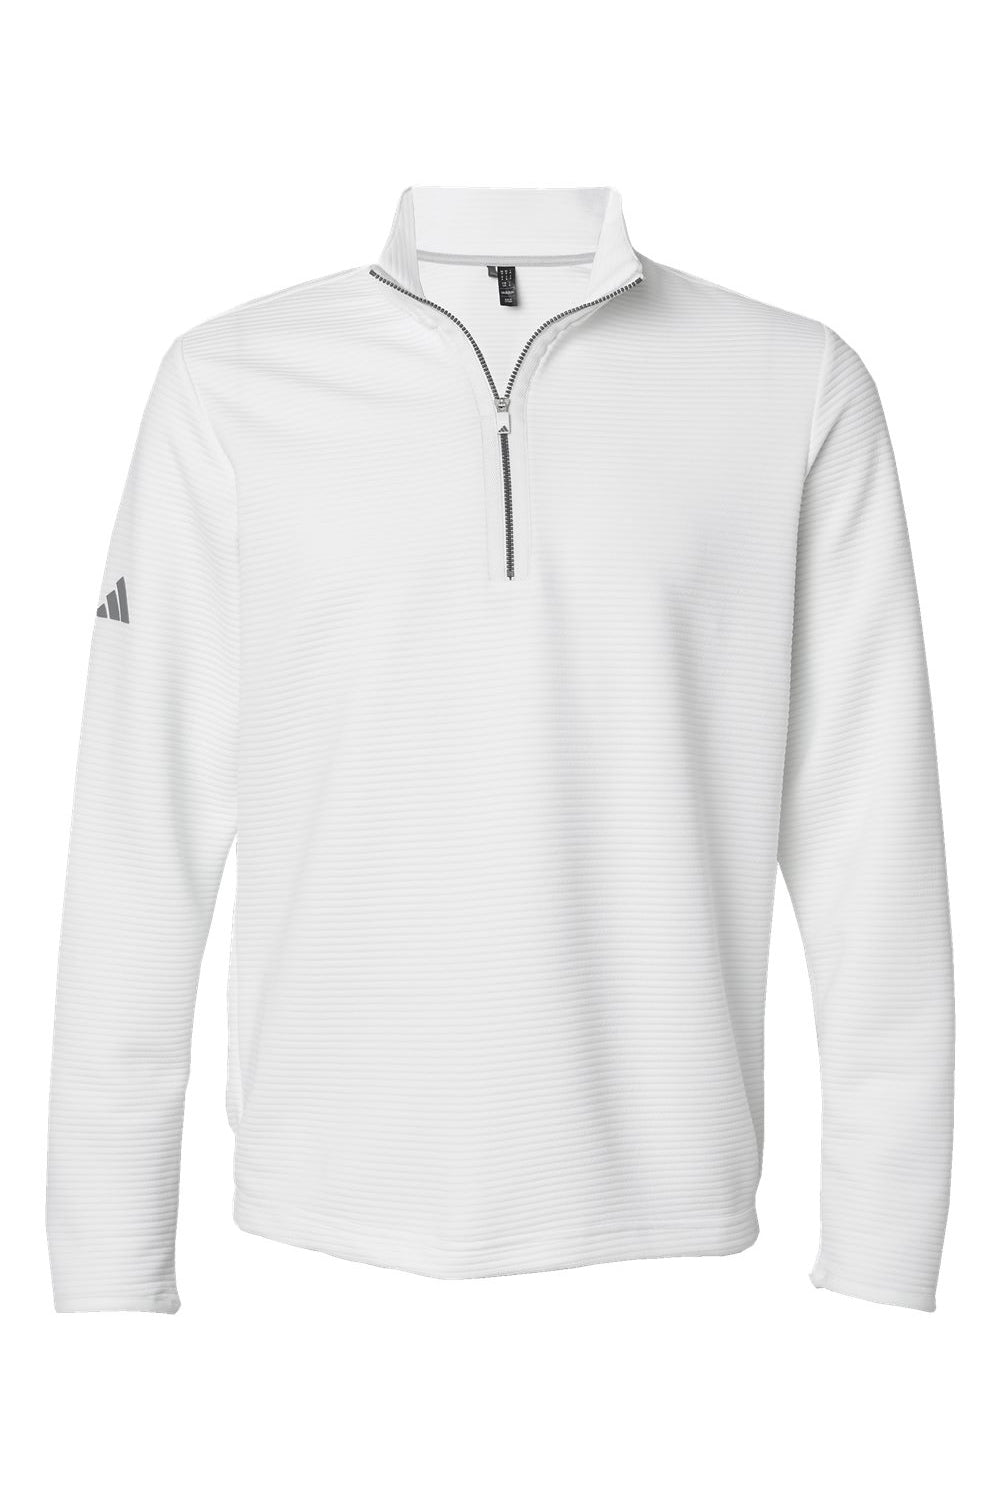 Adidas A588 Mens Spacer 1/4 Zip Pullover Core White Flat Front